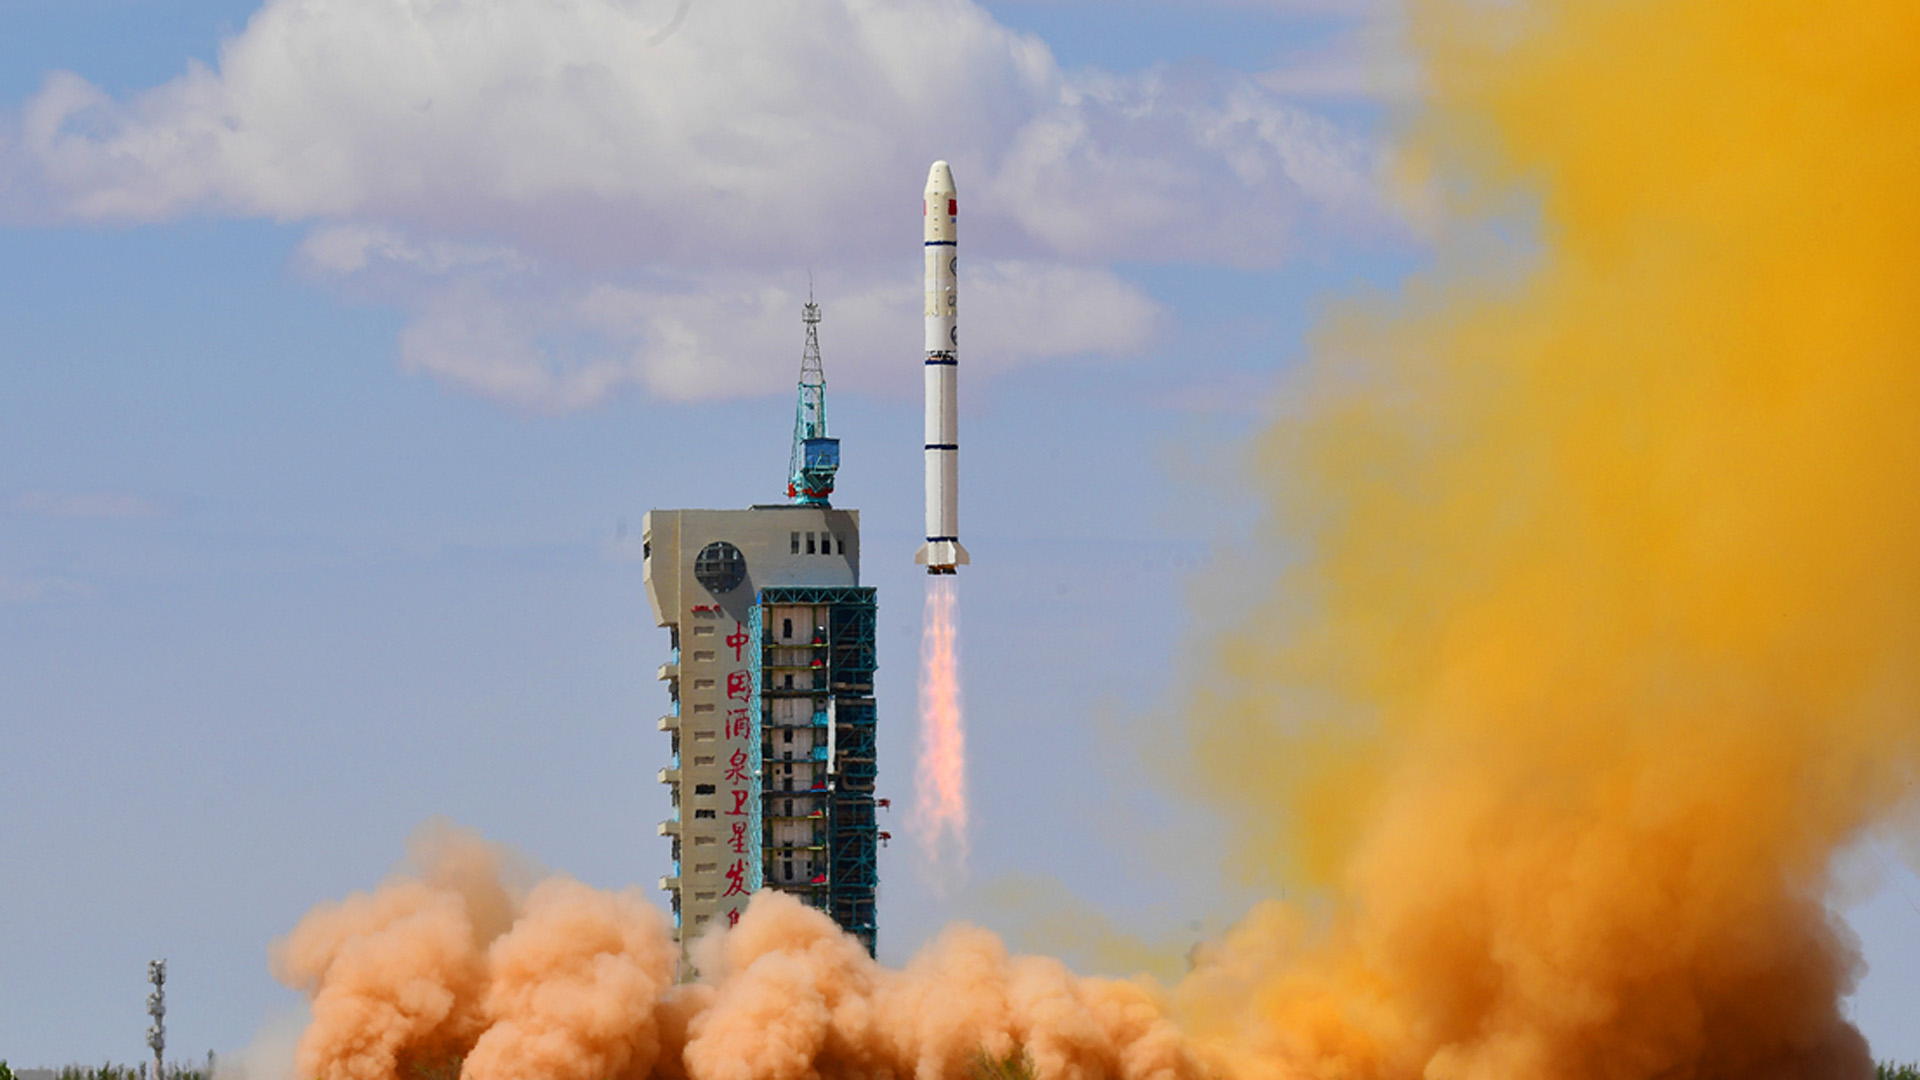 A Chinese Long March 2C rocket carrying the remote sensing satellites Siwei 01 and Siwei 02 launches from the Jiuquan Satellite Launch Center in northwest China on April 29, 2022.